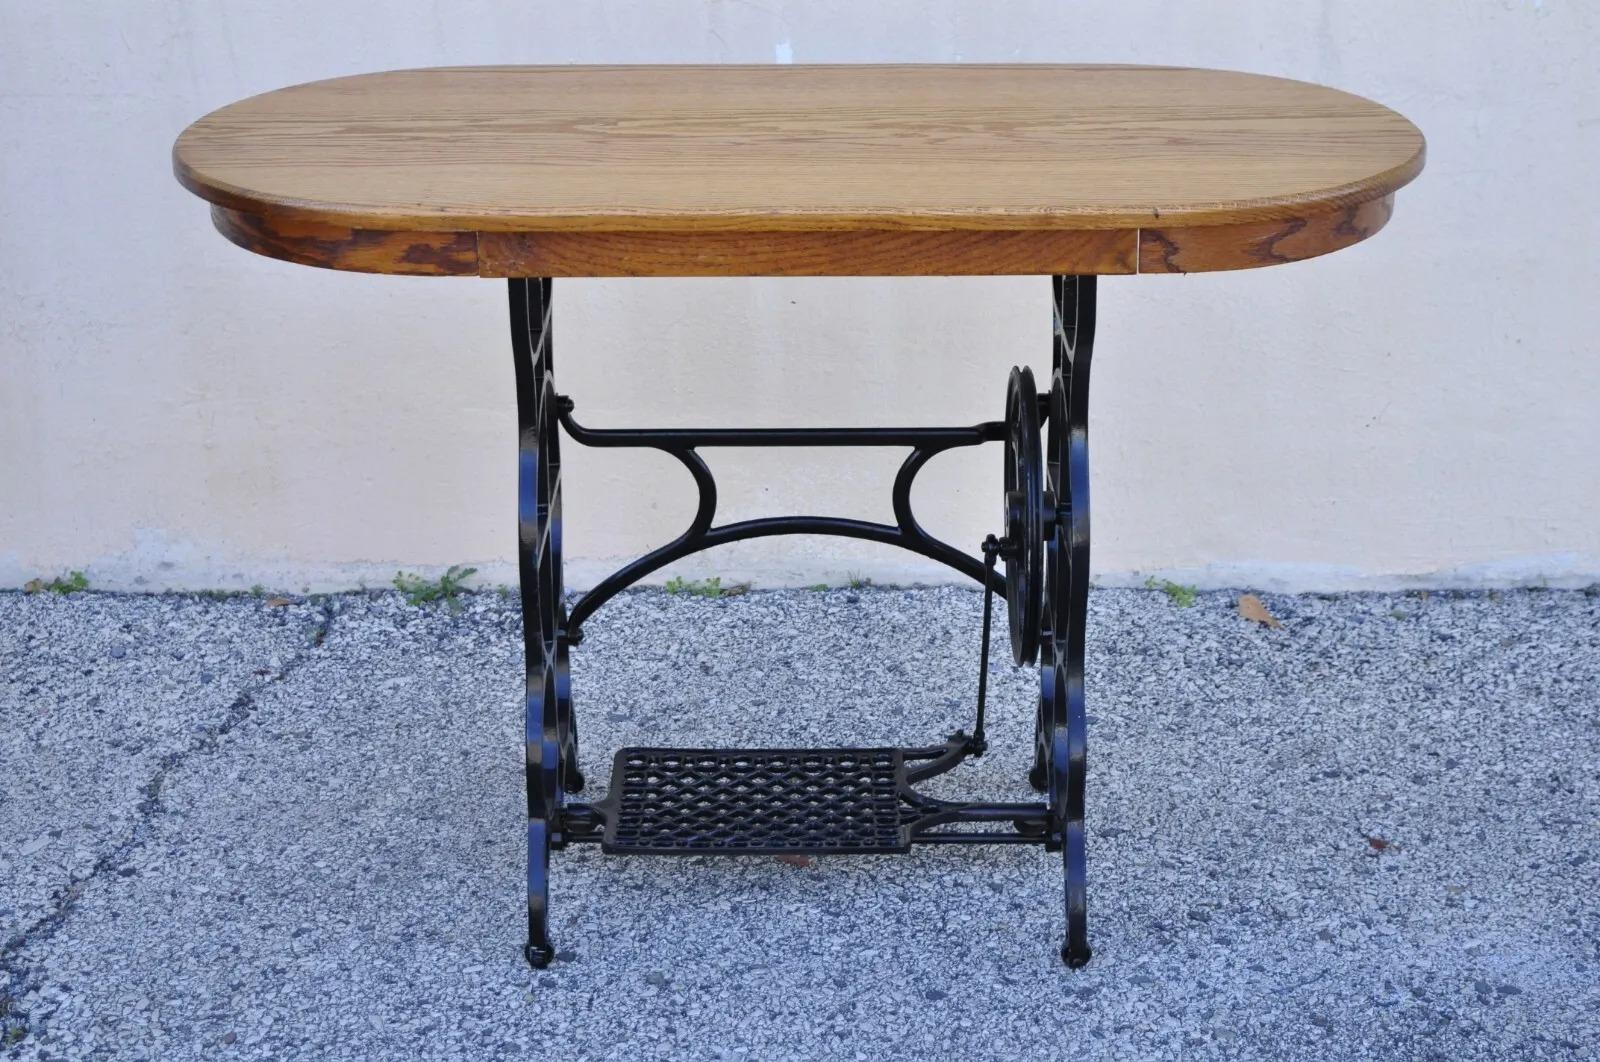 Antique Victorian cast iron treadle sewing machine base side table oval oak top. Item features an oval oak wood top, working cast iron treadle sewing machine base, very nice antique item, great style and form. Circa Early 1900s. Measurements: 30